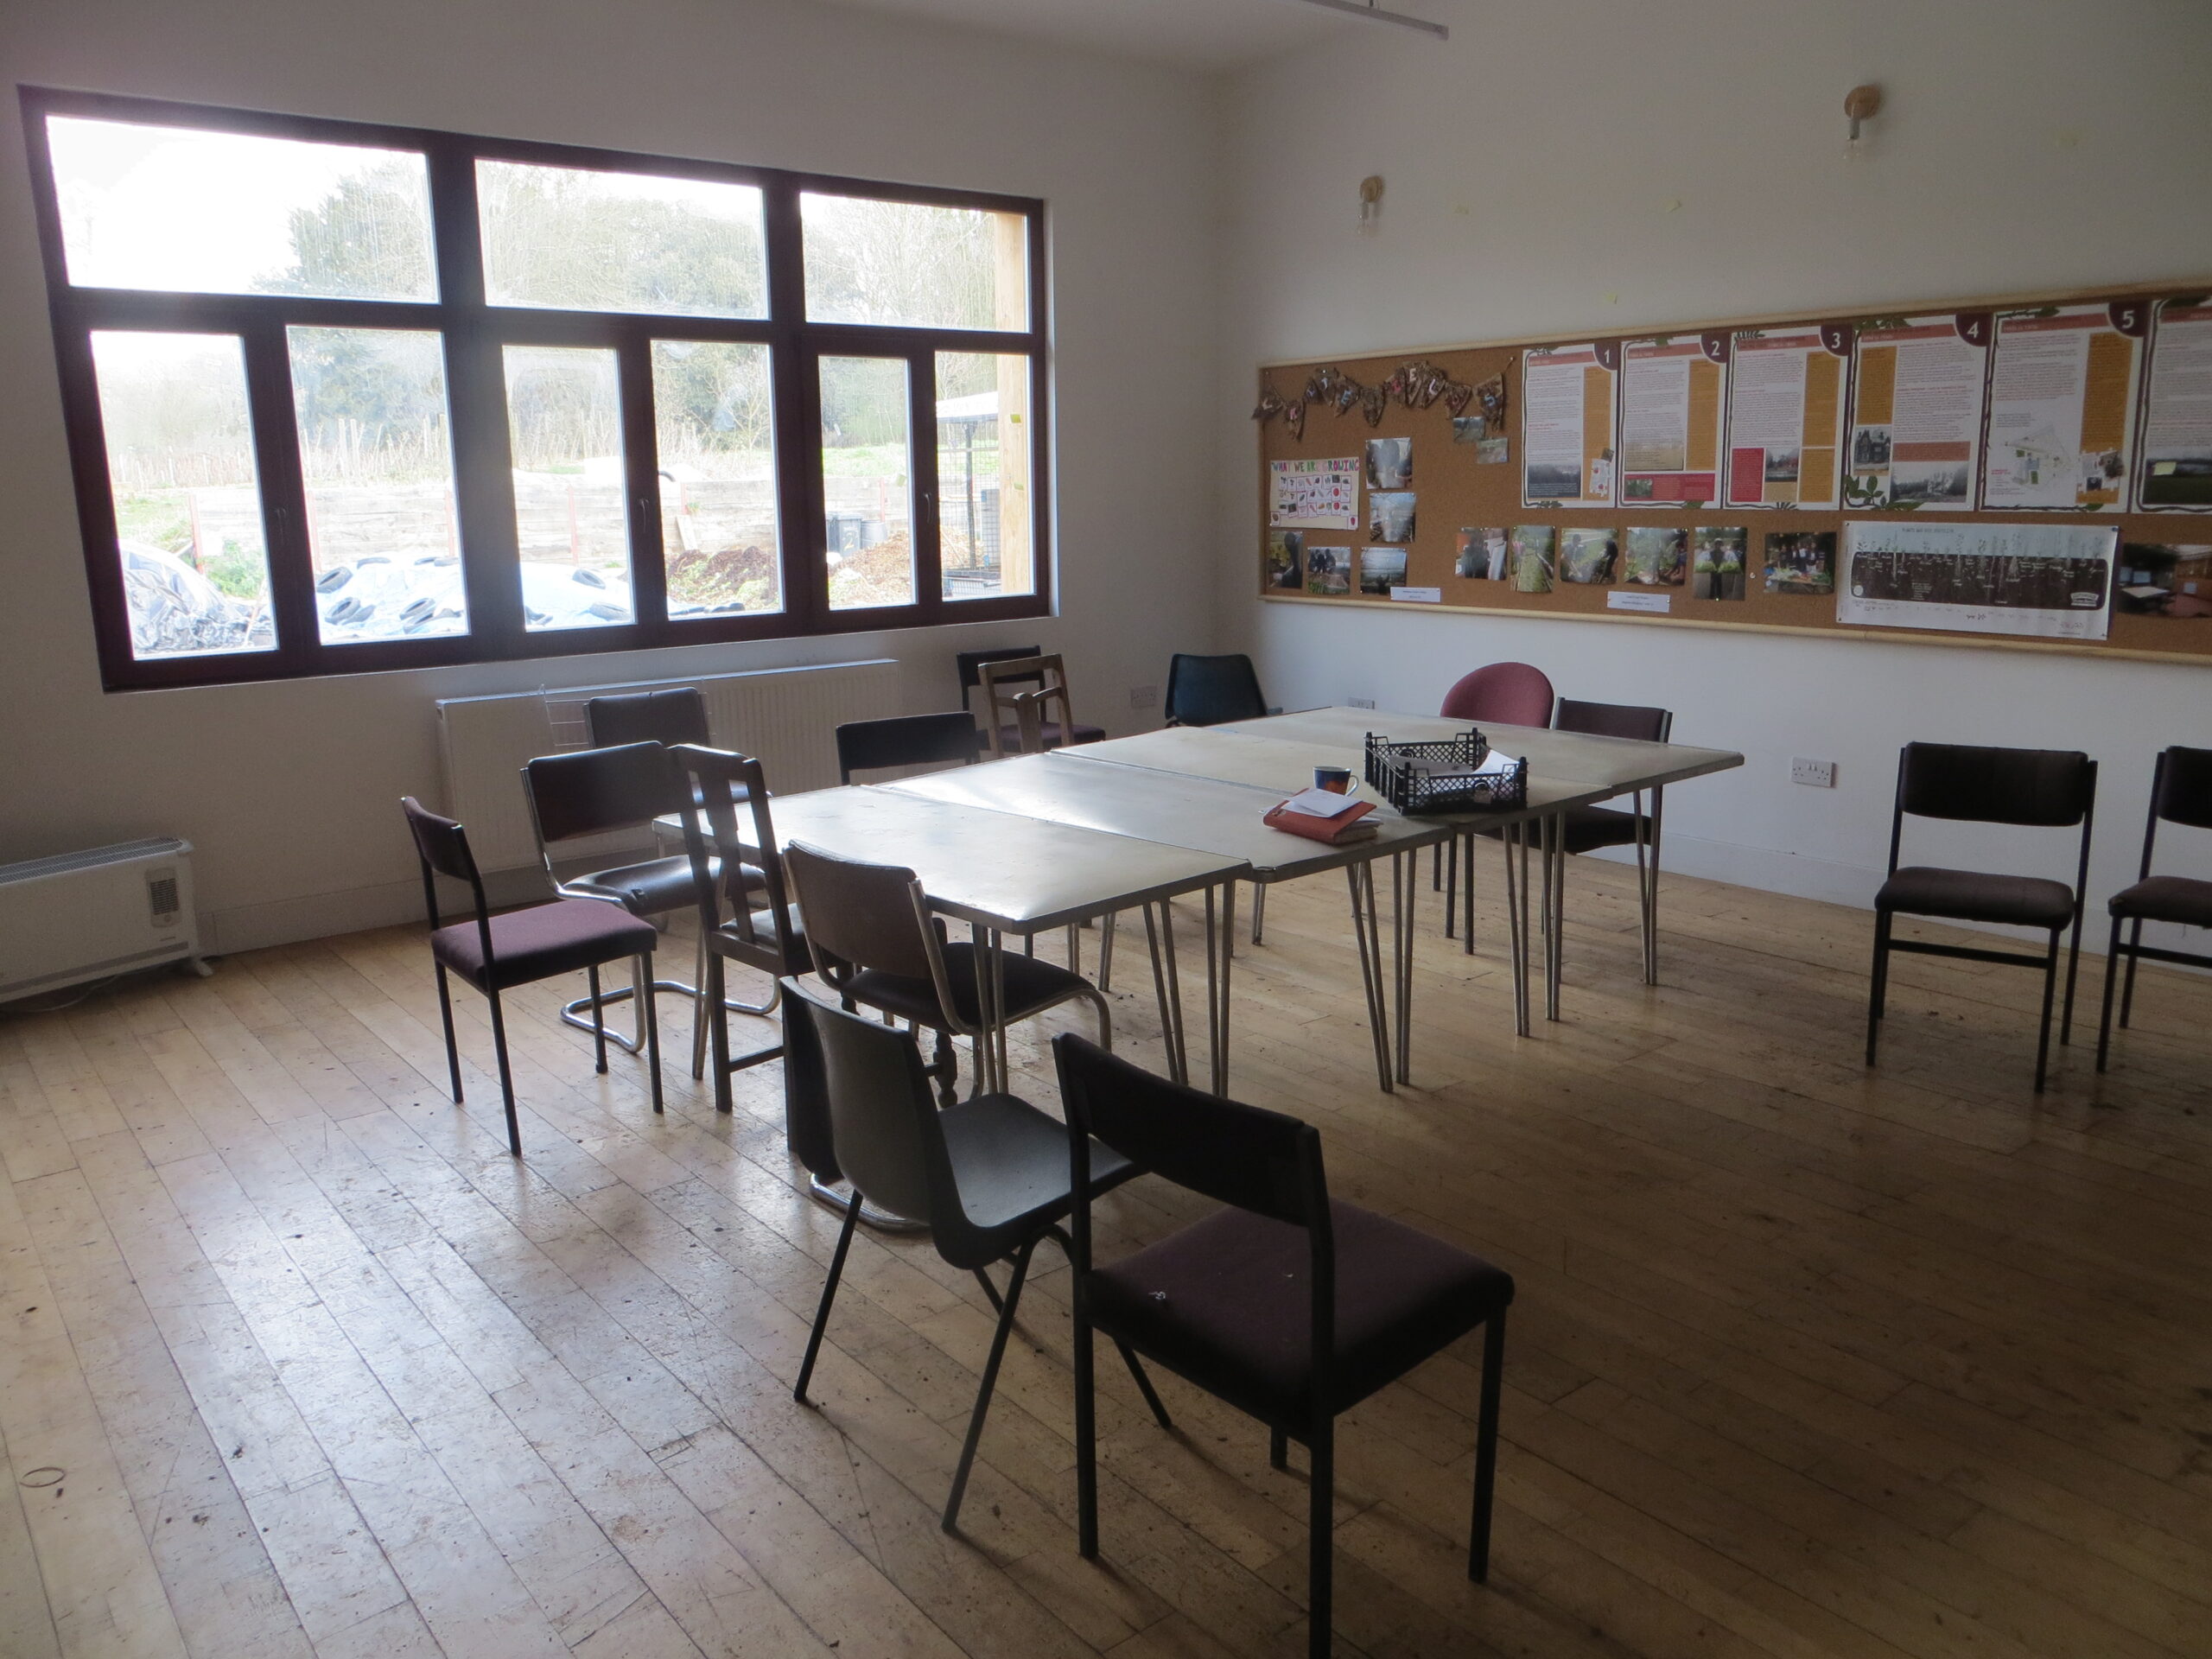 Classroom for hire